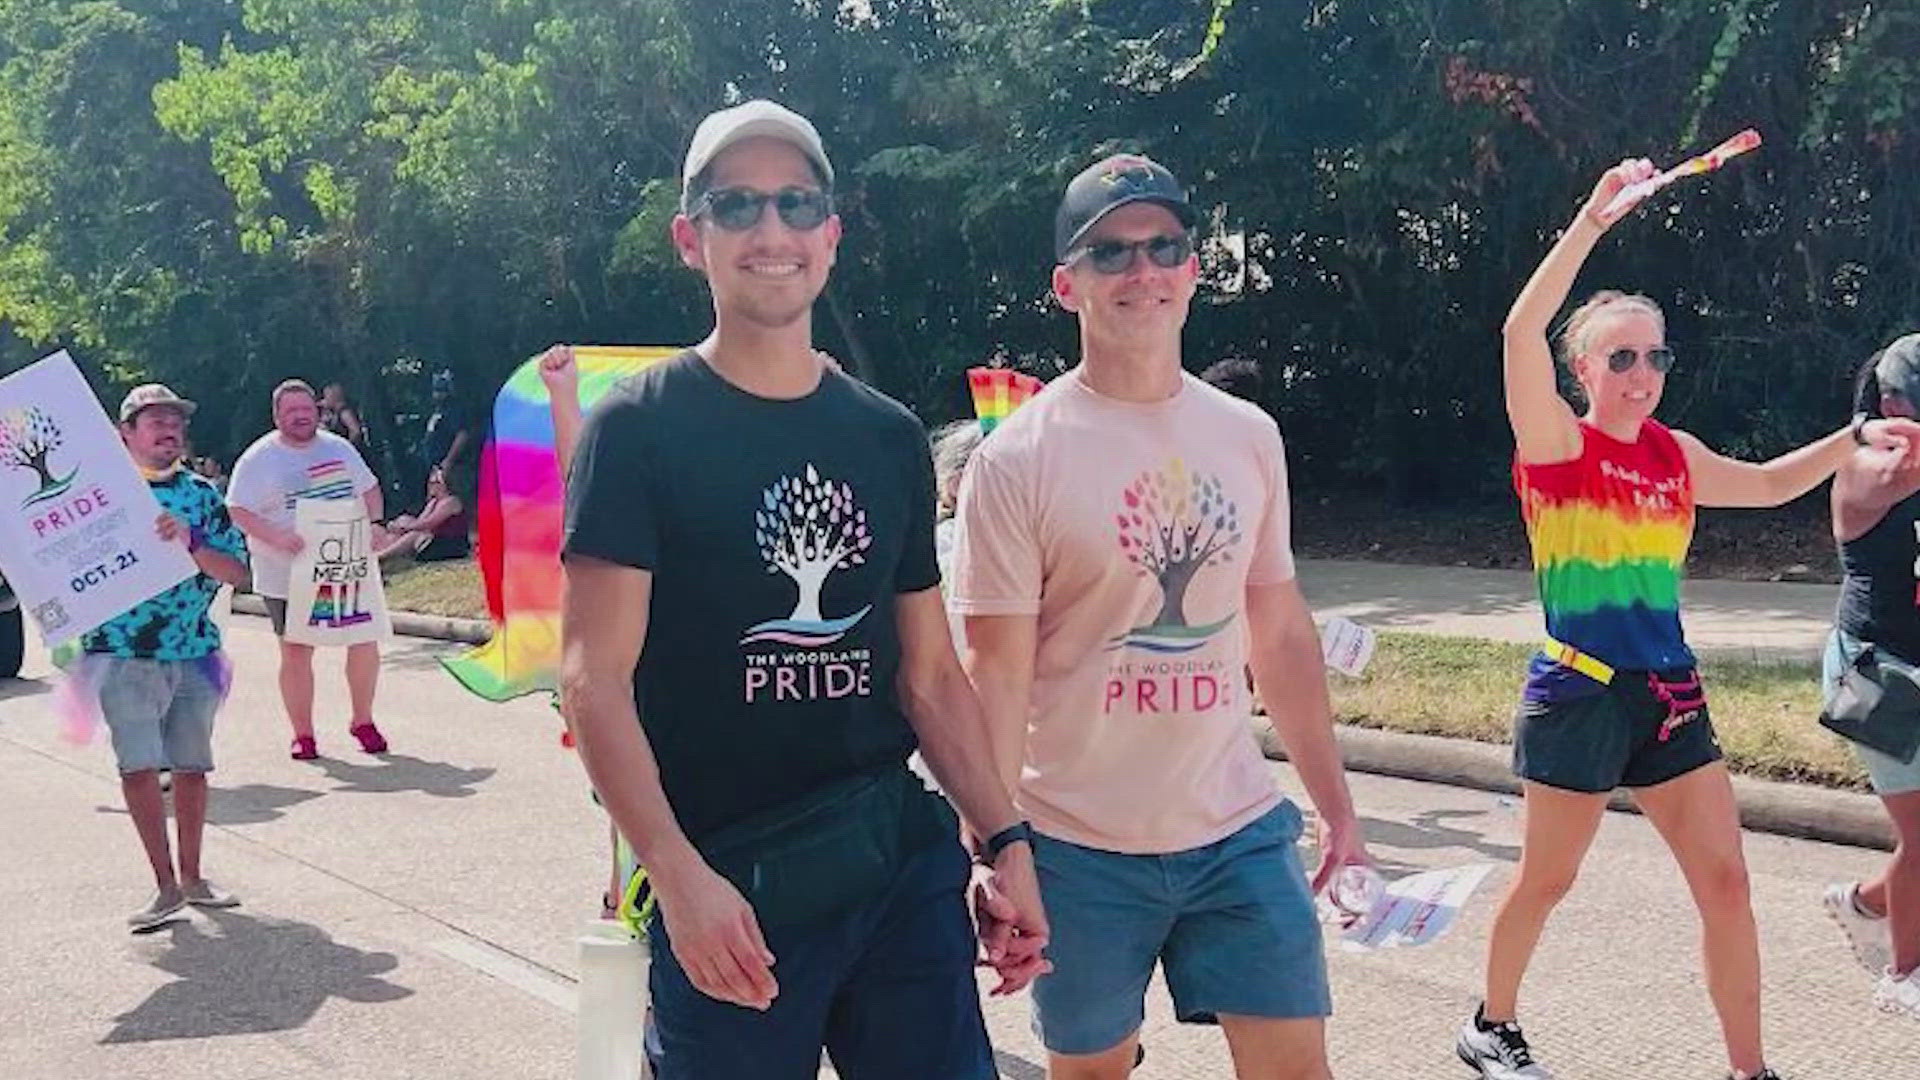 Since it was started in 2018, The Woodlands Pride has blossomed into a powerhouse organization with a headlining festival that continues to grow.